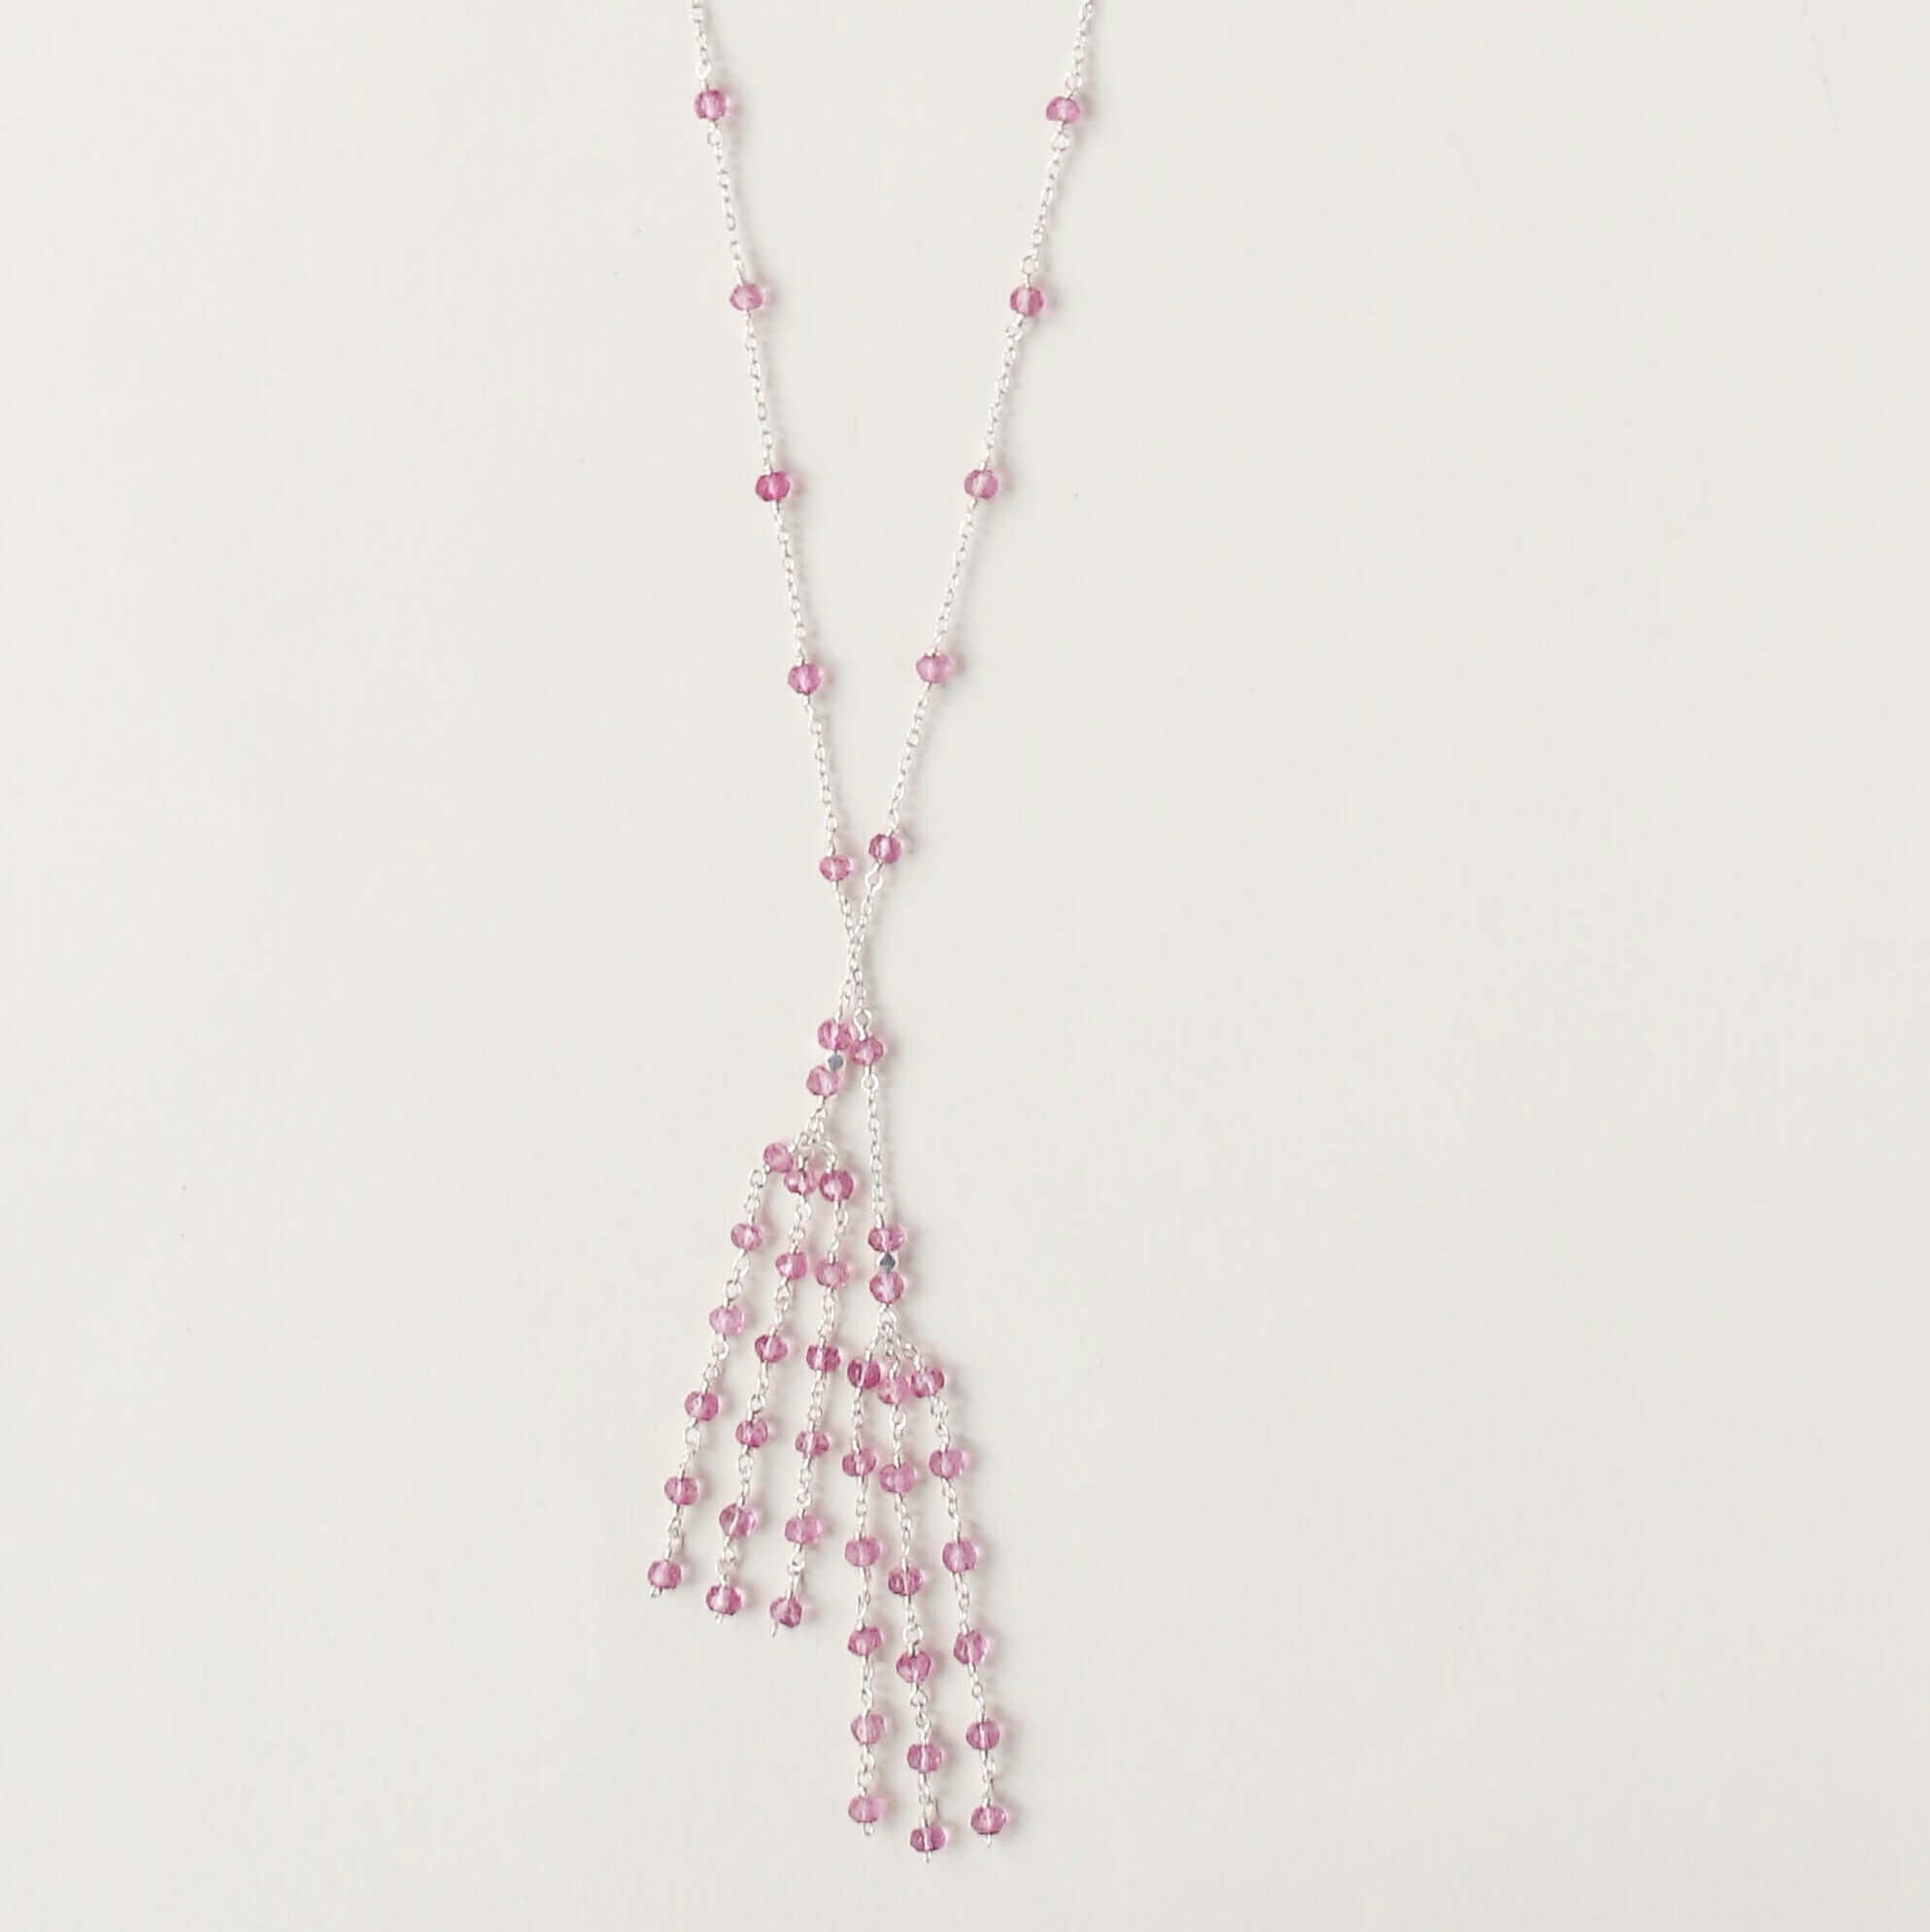 Silver plated Pink Tourmaline Lariat Necklace with a stunning tassel